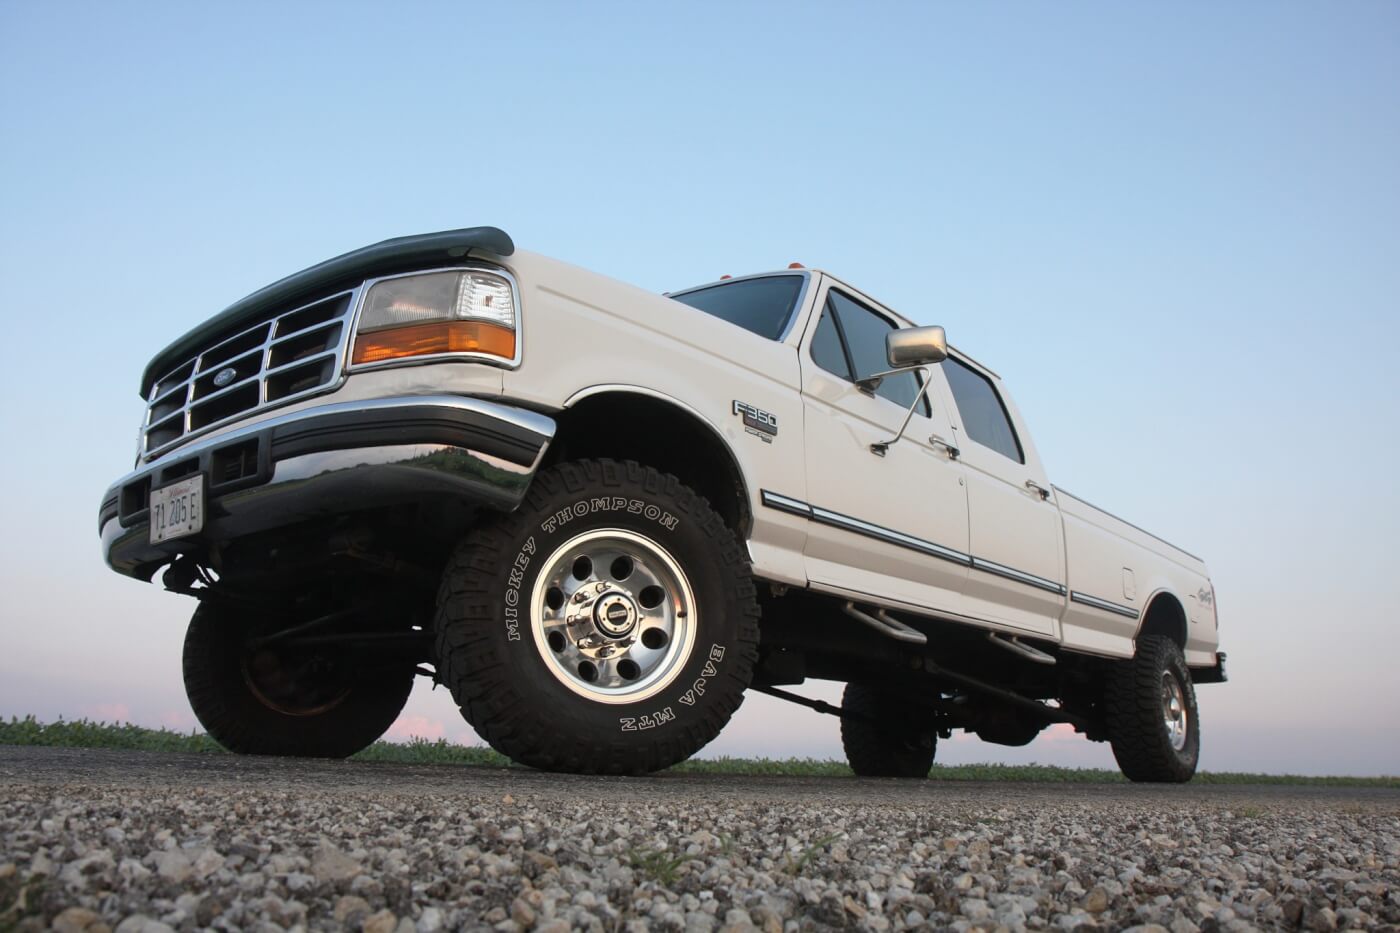 While our 1997 F-350 test mule had a parts combination capable of making 600-rwhp, the 195,000-mile stock bottom end 7.3L under the hood had to be tuned conservatively in order to stay in one piece, and remain a reliable daily driver. With an owner not yet willing to spend money on a built engine, not wanting to bump up timing any more (harder on parts), yet wanting to go faster, there was really only one thing left to try. And that’s exactly how the idea for this test was born.